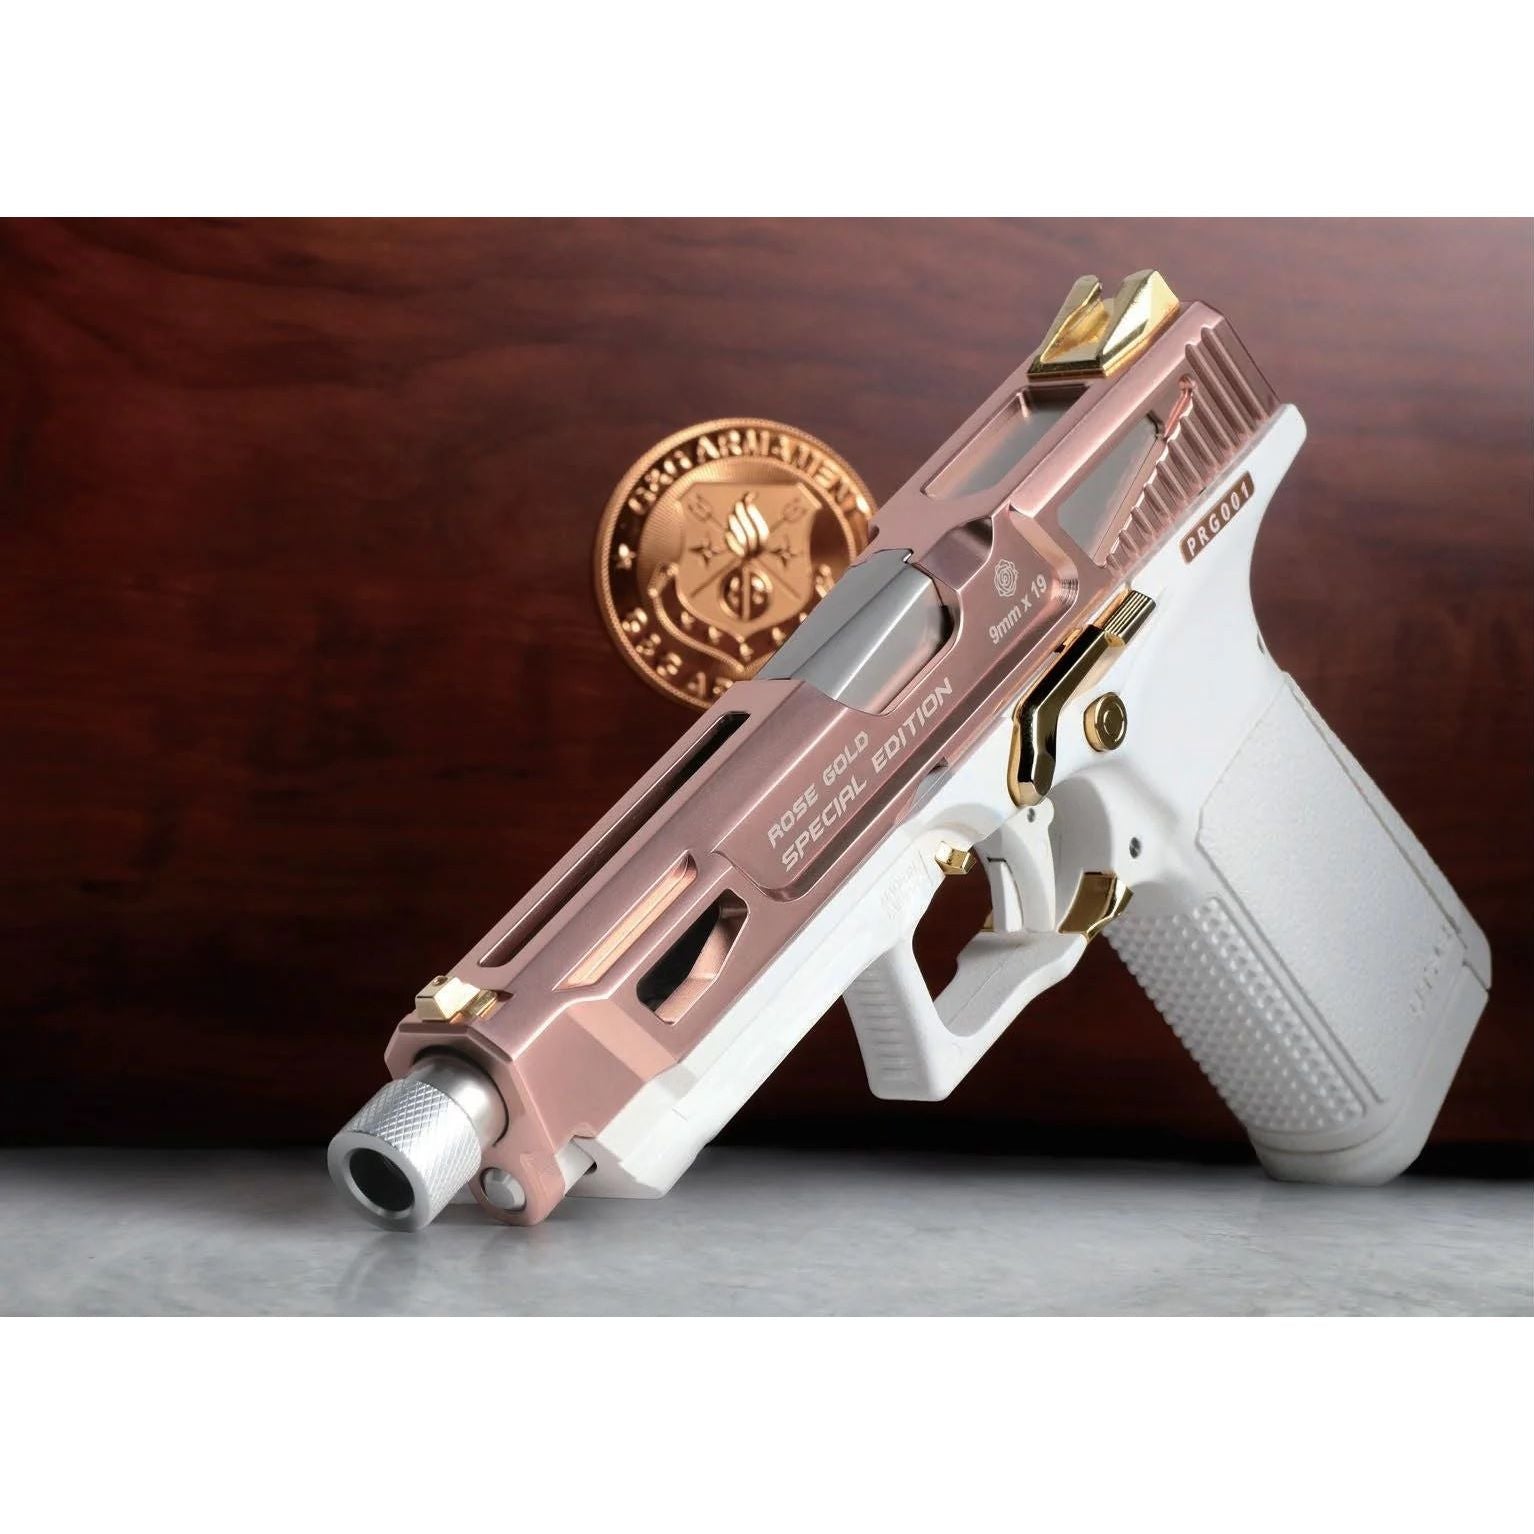 GTP9 ROSE GOLD EDITION LIMITEE